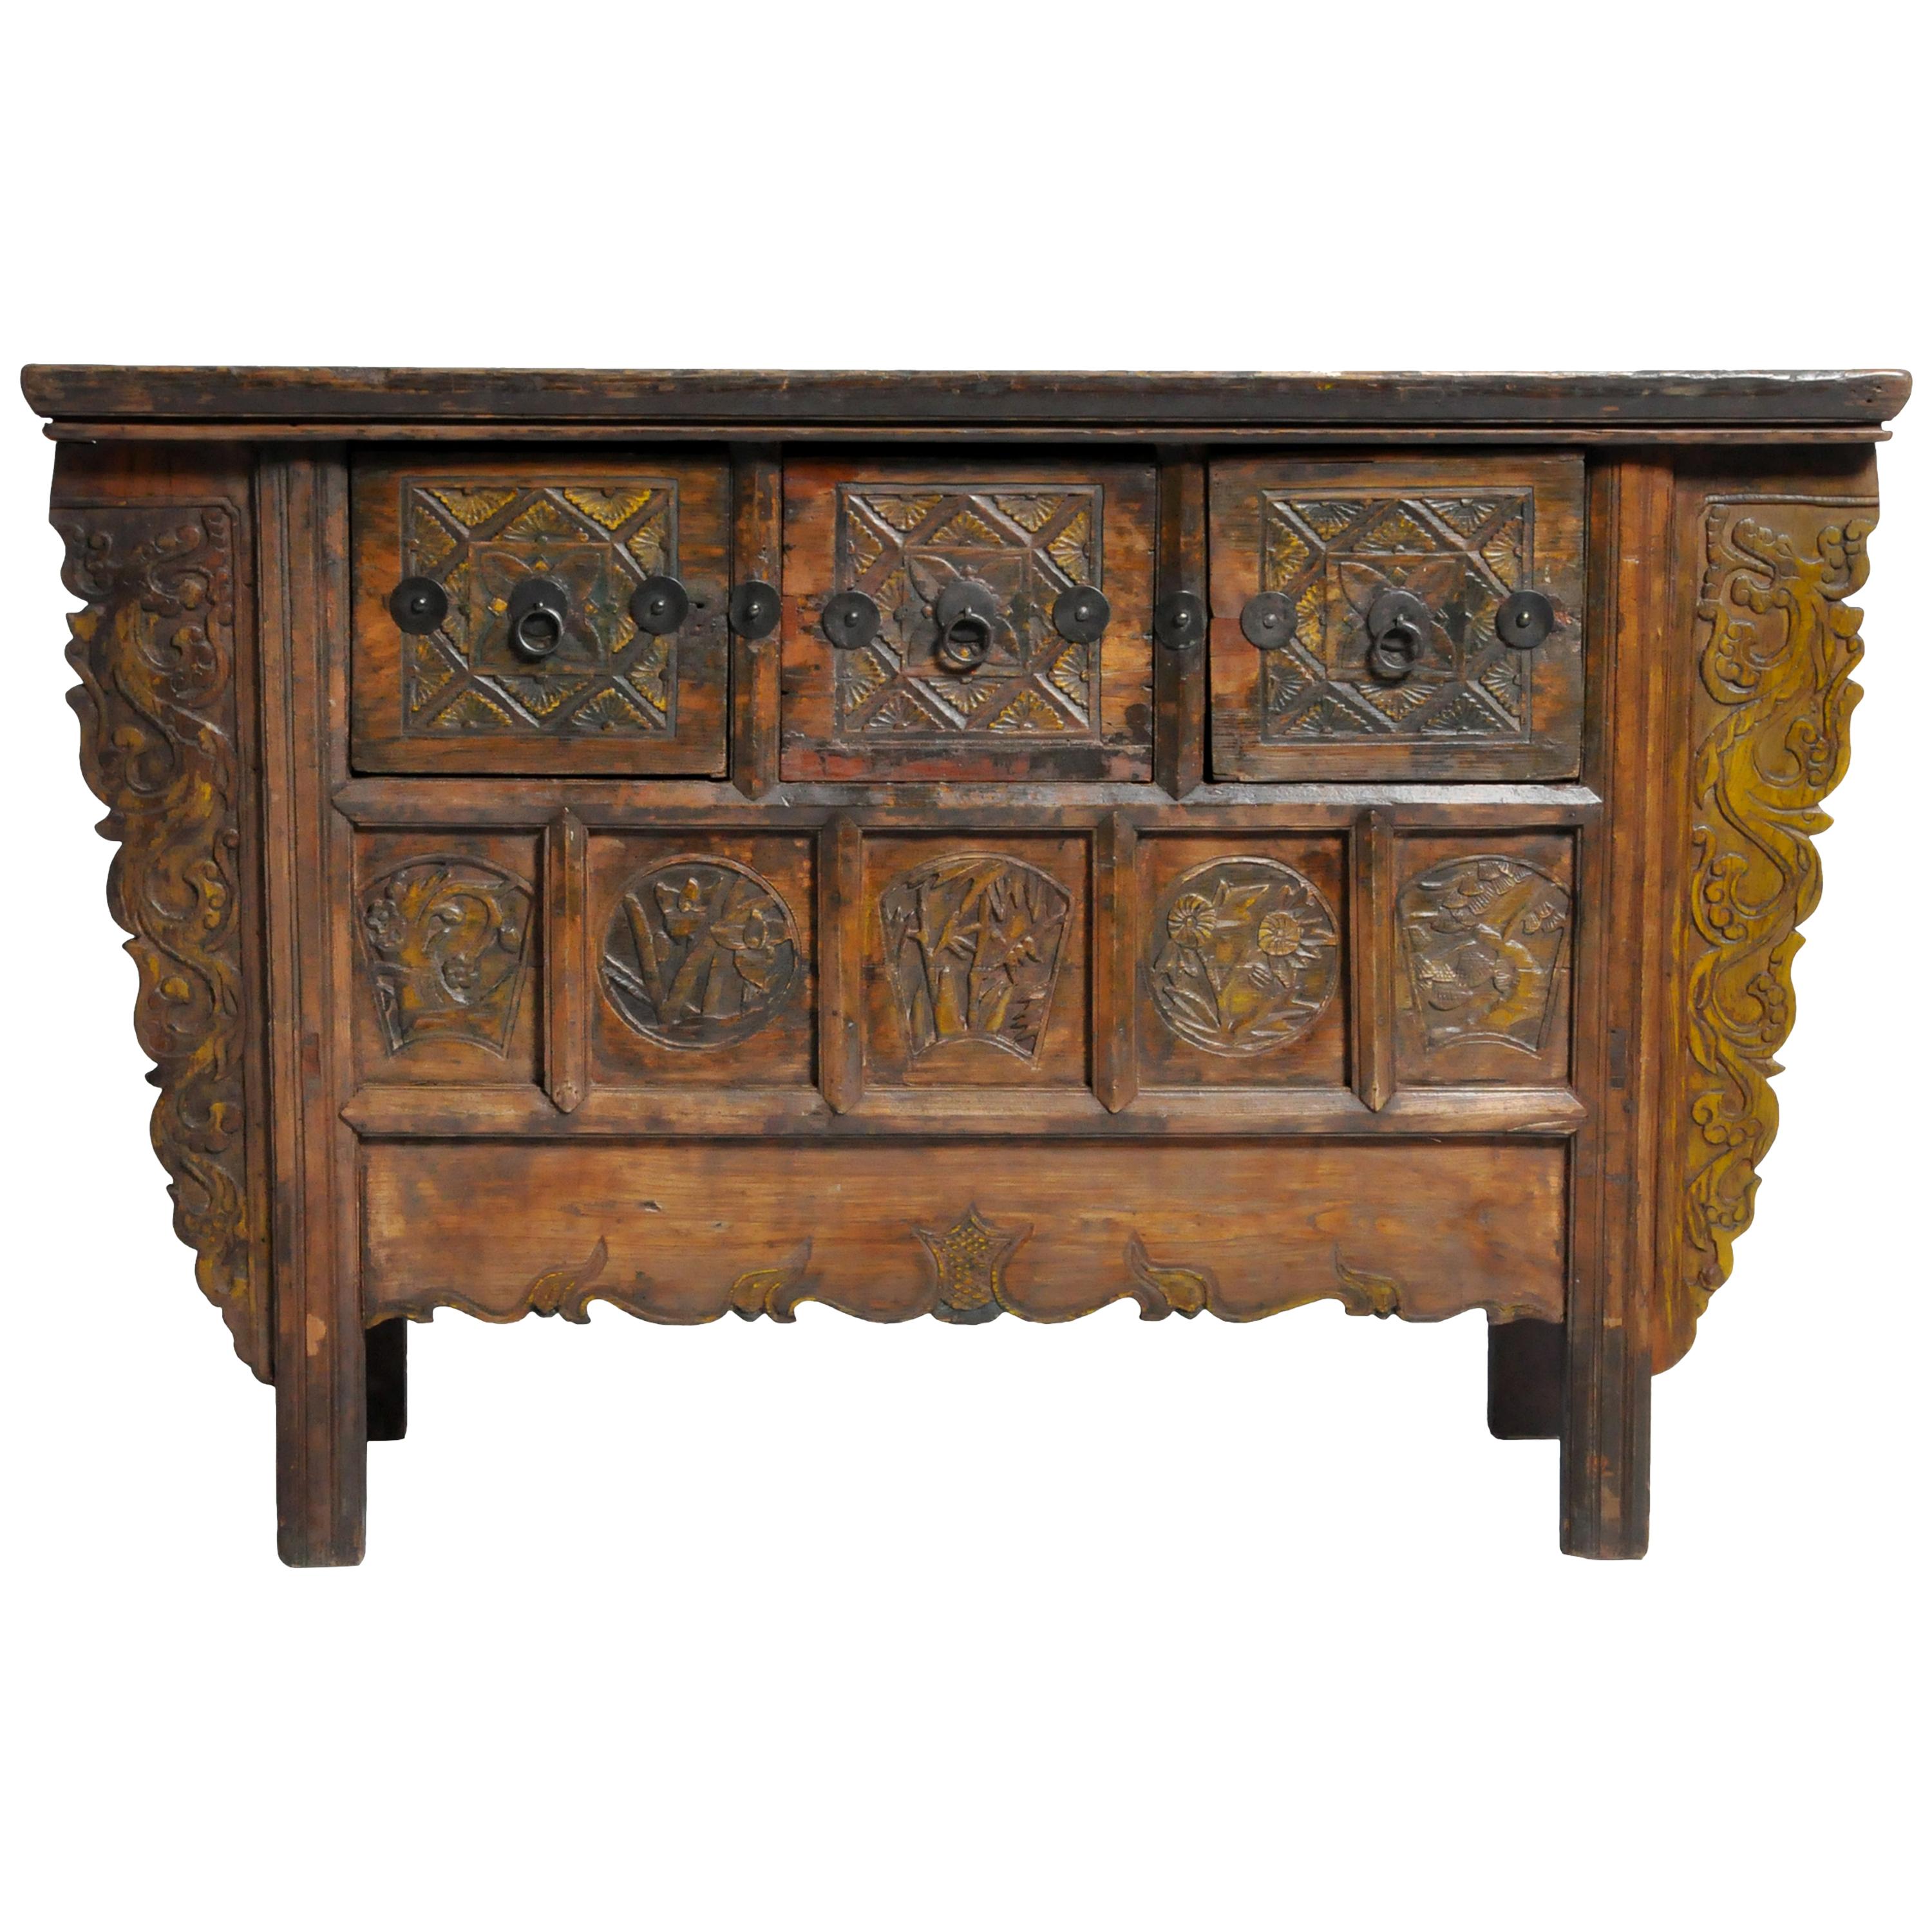 Chinese Cabinet with Three Drawers and "Five Seasons" Carving